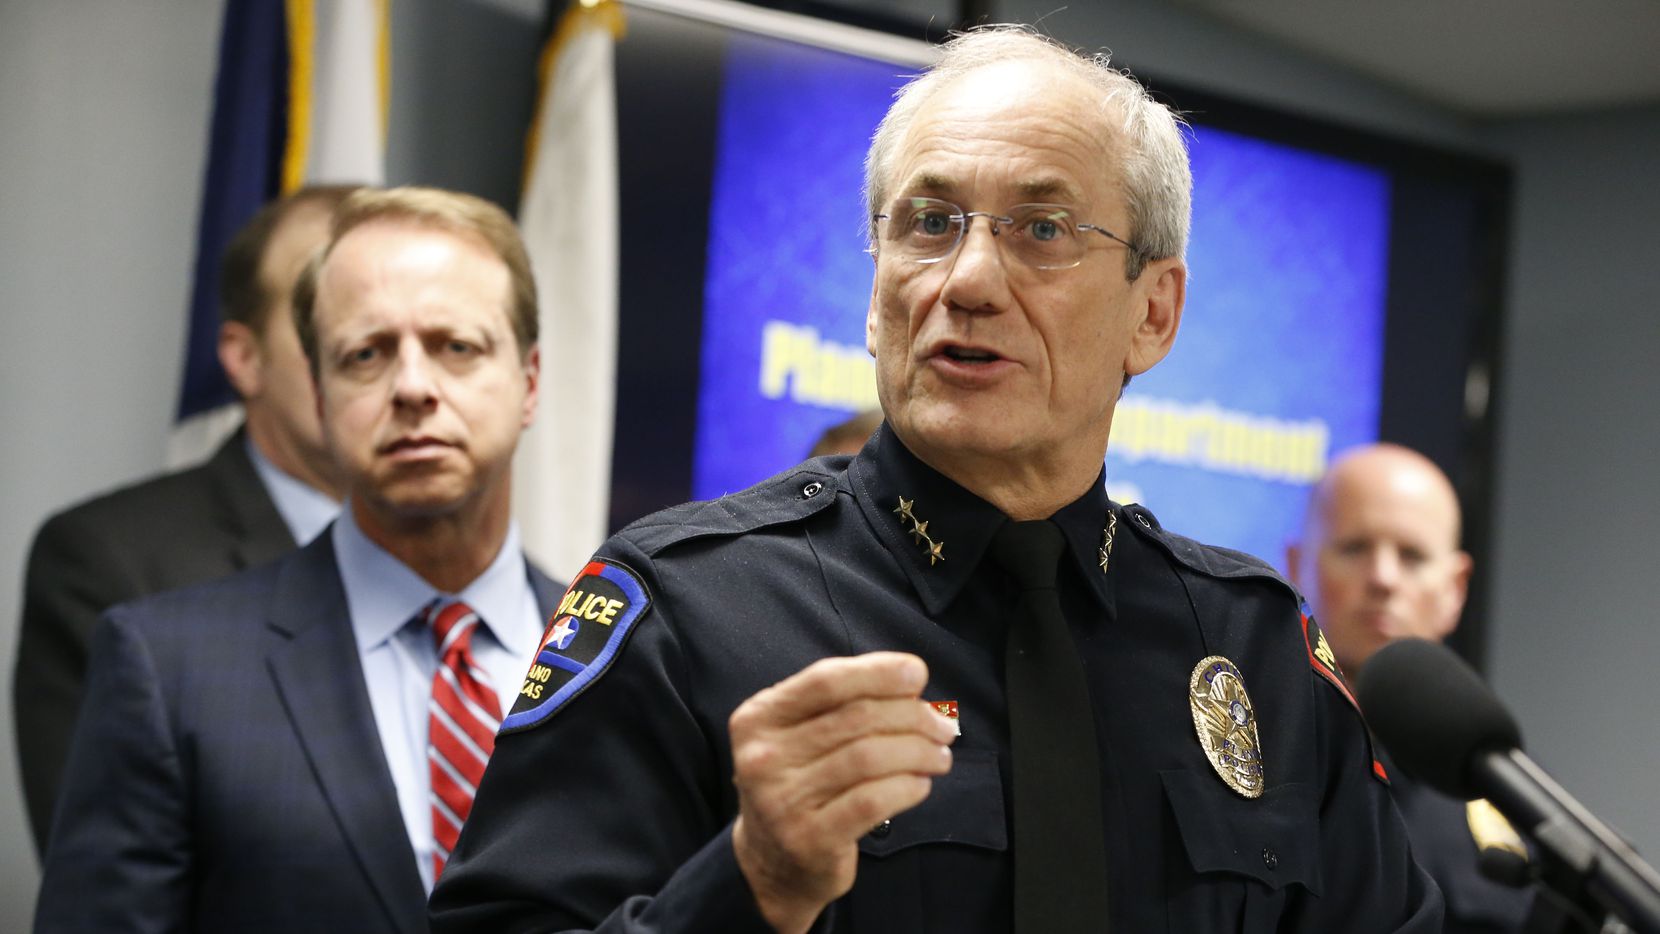 Plano Police Chief Gregory W. Rushin answers questions during a news conference Friday after Billy Chemirmir, 45, was arrested on charges of capital murder and attempted capital murder involving elderly women victims.